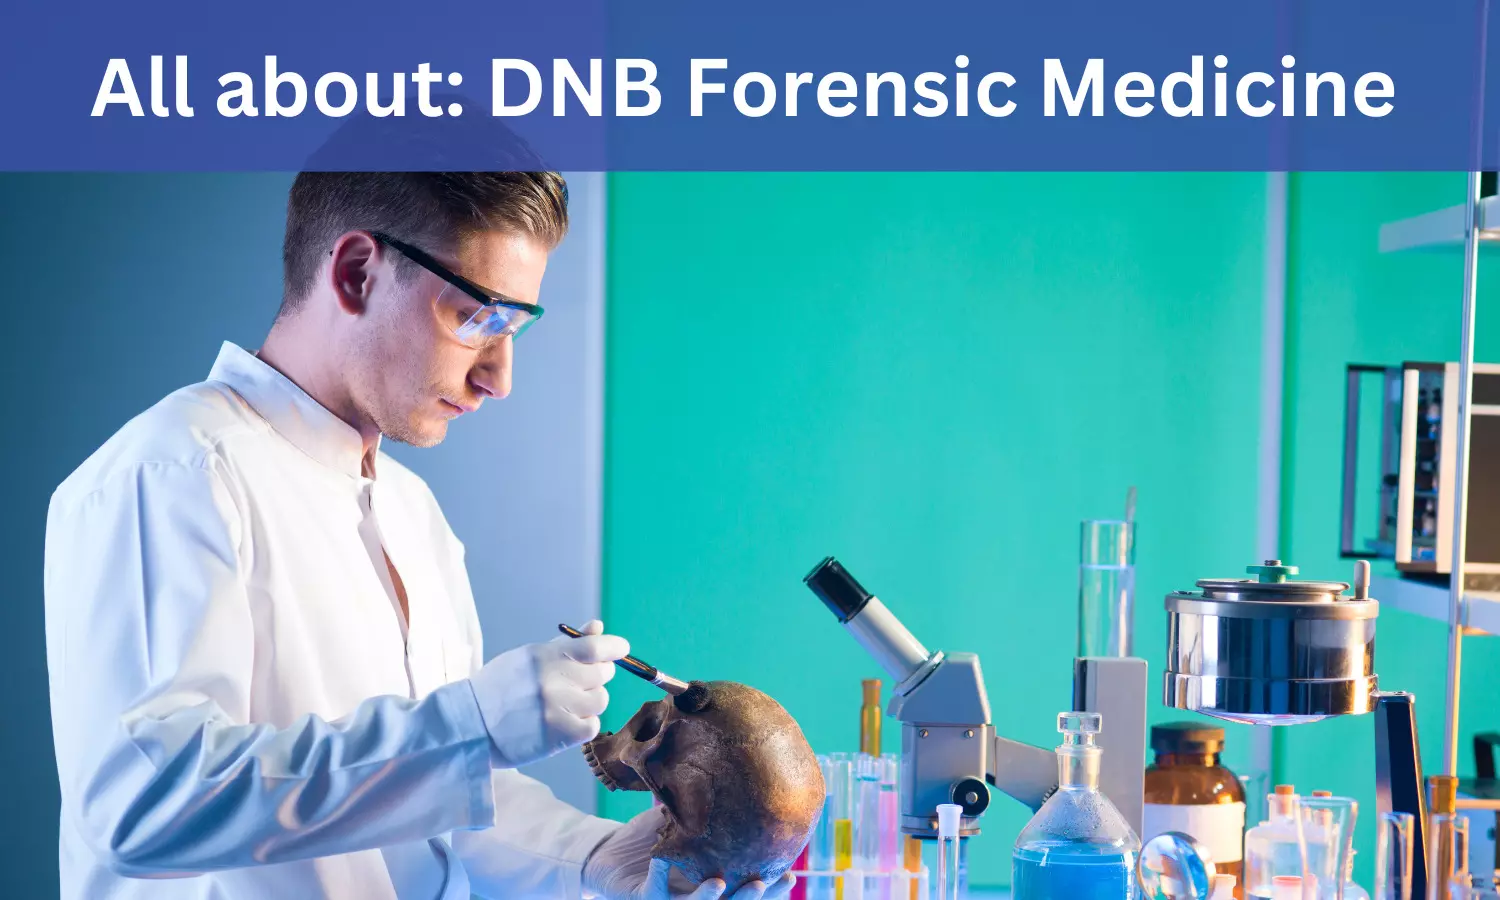 DNB Forensic Medicine: Admissions, Medical colleges, fees, eligibility criteria details